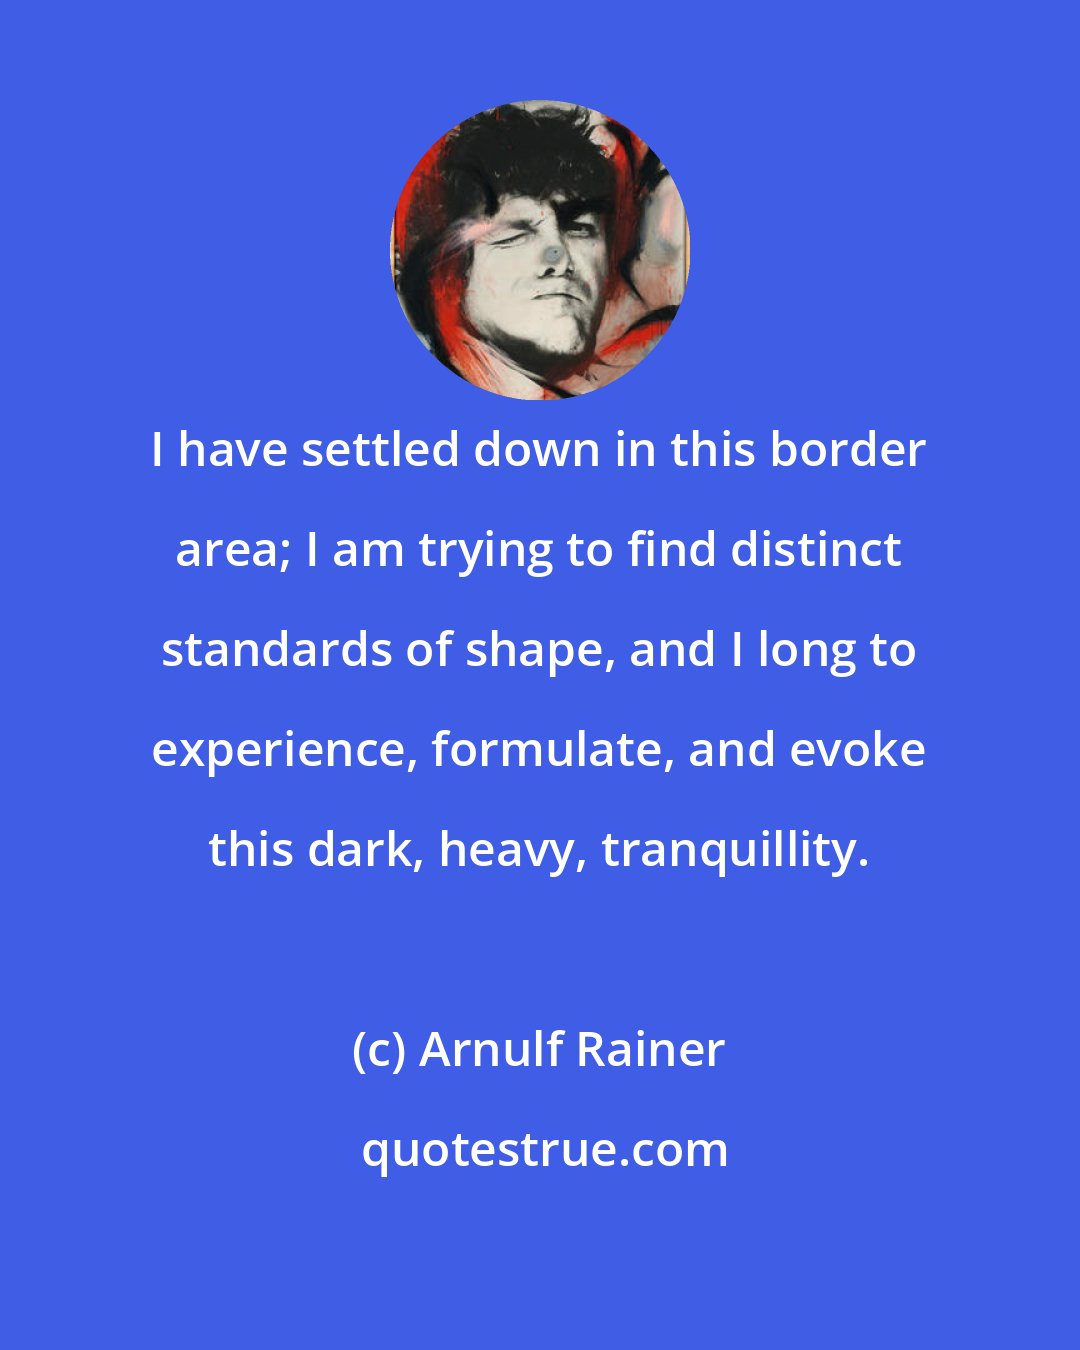 Arnulf Rainer: I have settled down in this border area; I am trying to find distinct standards of shape, and I long to experience, formulate, and evoke this dark, heavy, tranquillity.